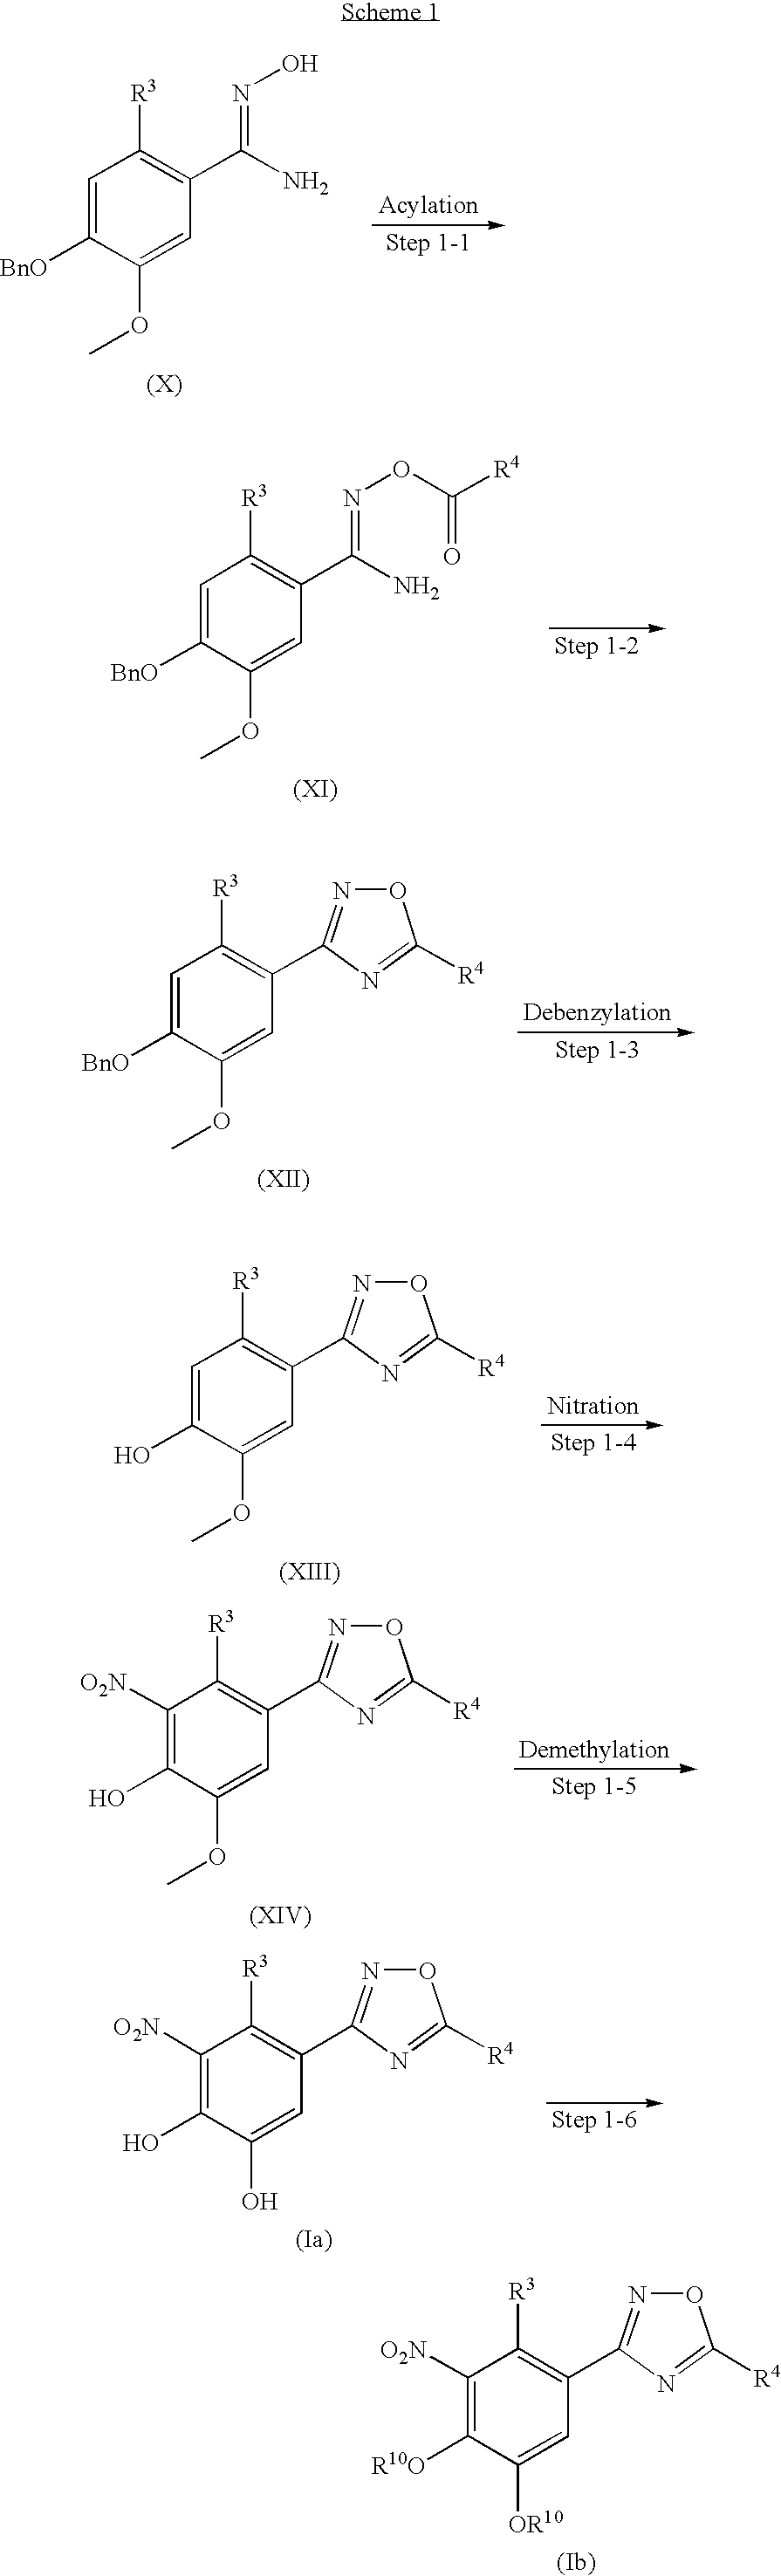 Novel catechol derivative, pharmaceutical composition containing the same, use of the catechol derivative, and use of the pharmaceutical composition